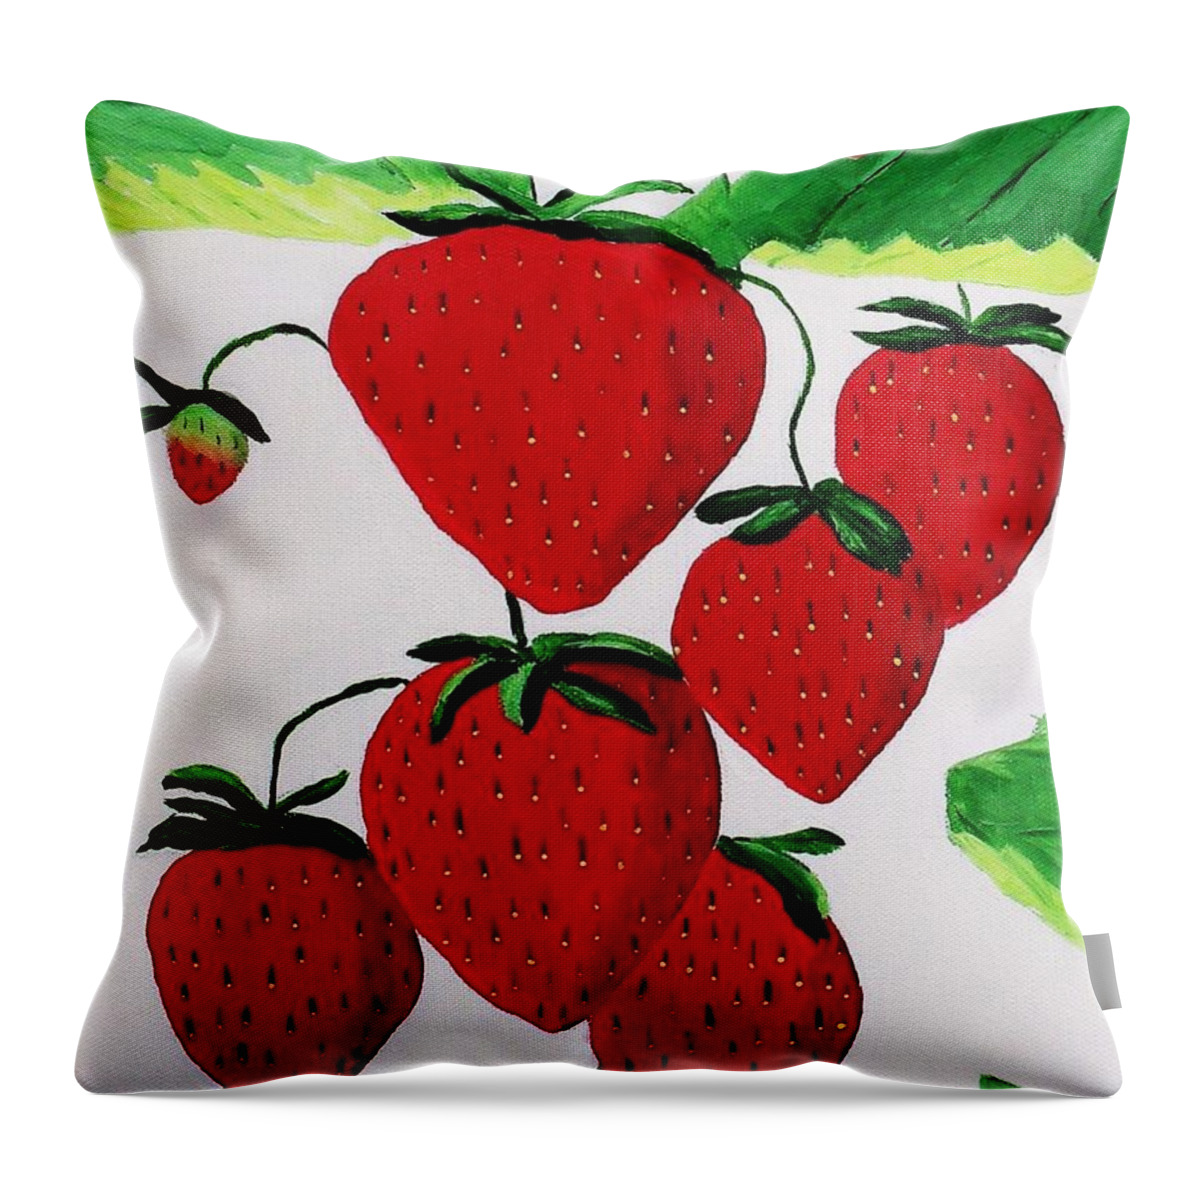 Strawberries Throw Pillow featuring the painting Strawberries by Rodney Campbell